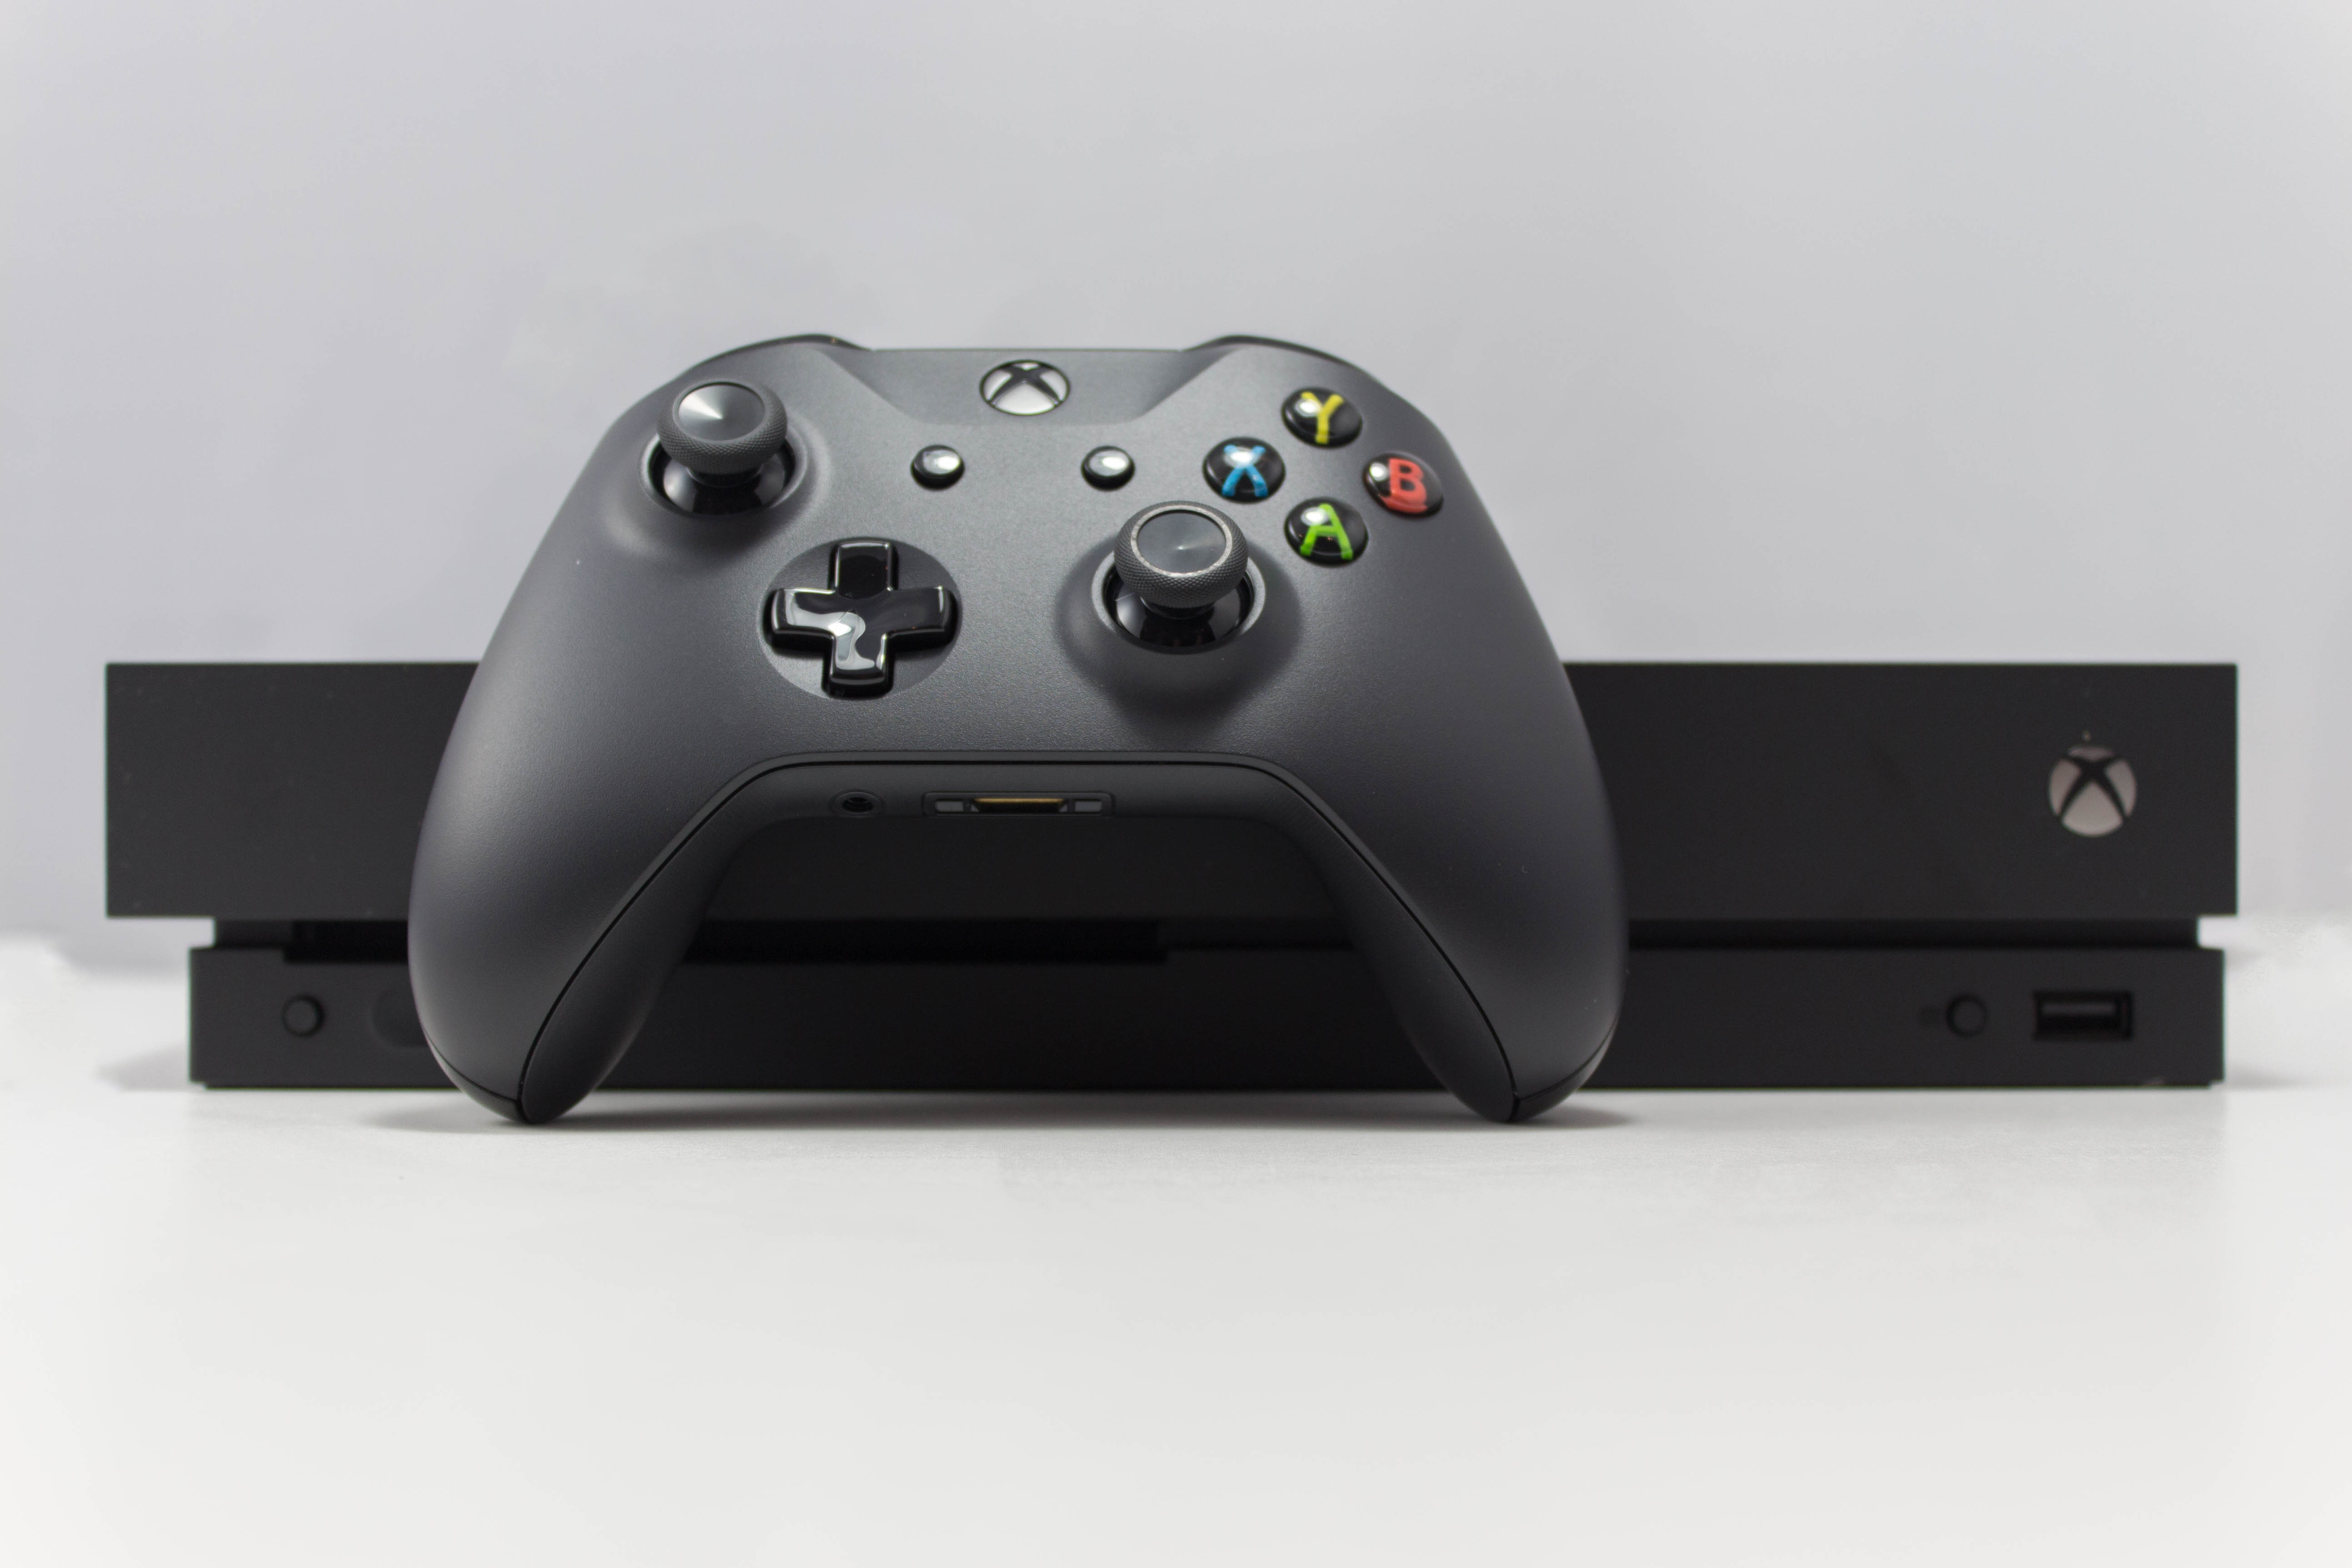 verhouding venijn krans The Xbox One X Design - The Xbox One X Review: Putting A Spotlight On Gaming